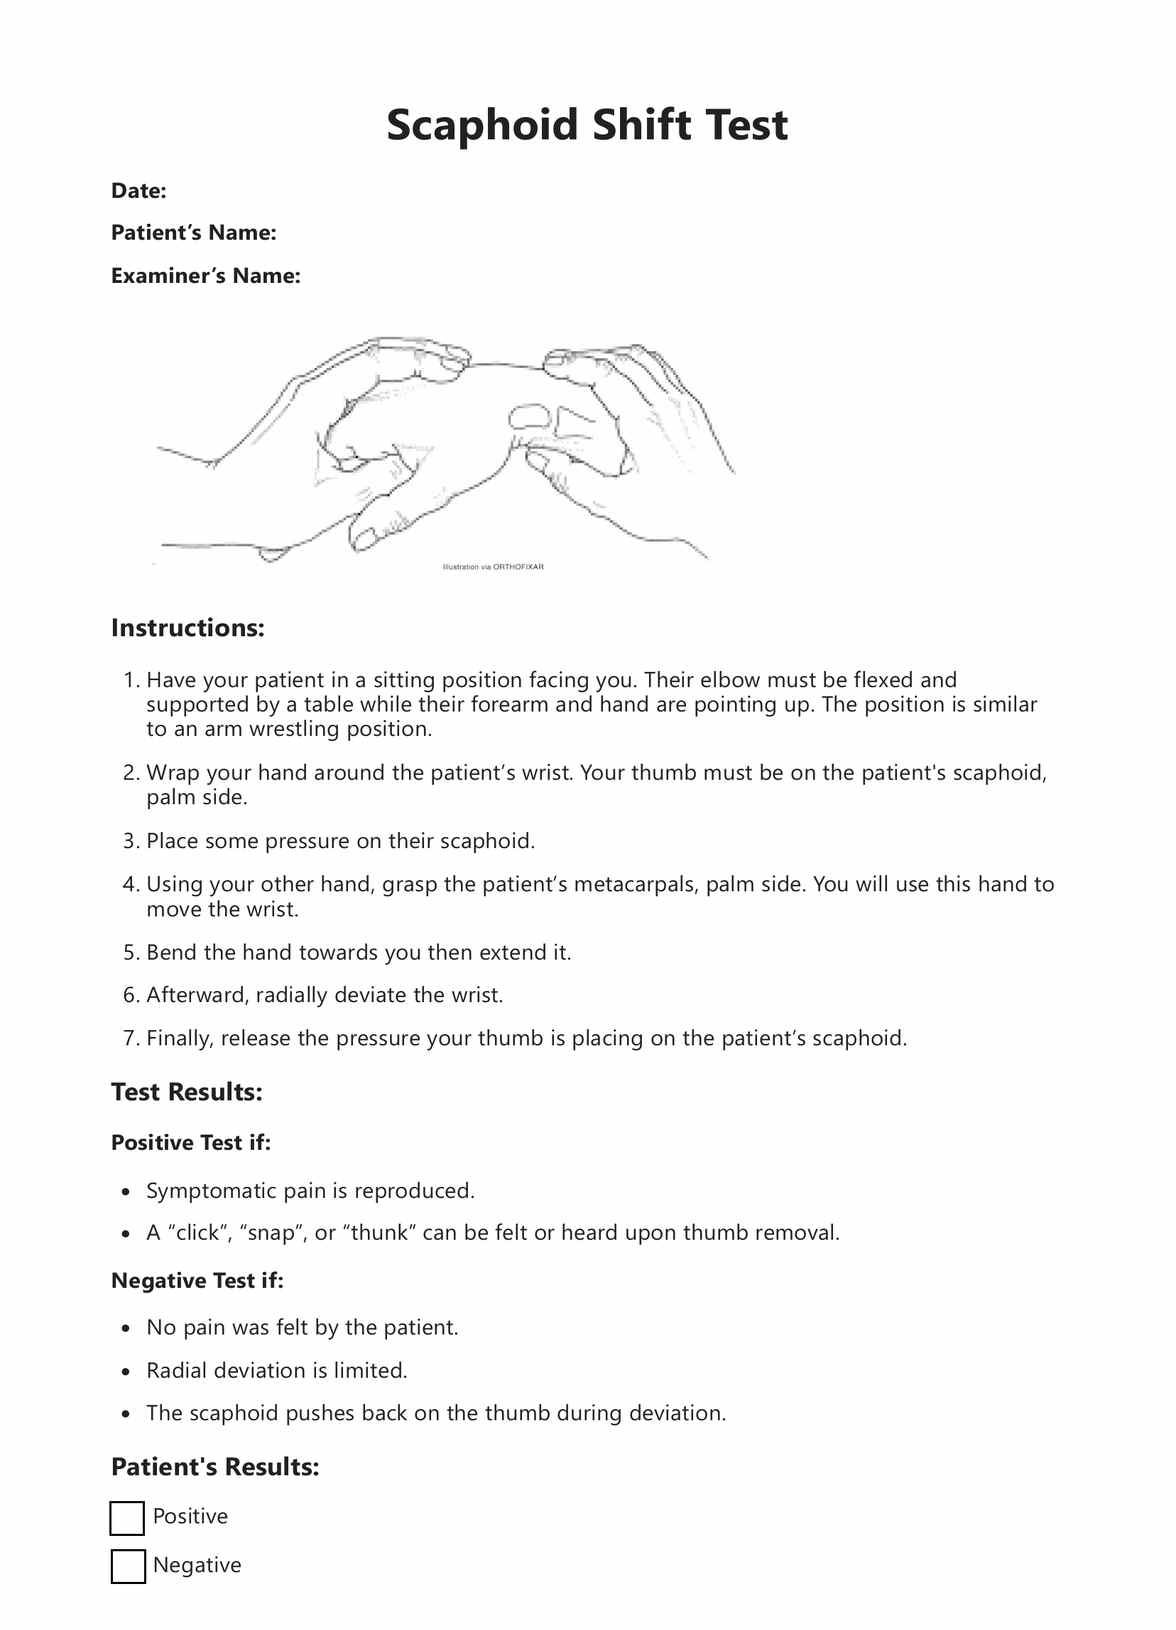 Scaphoid Shift Test PDF Example